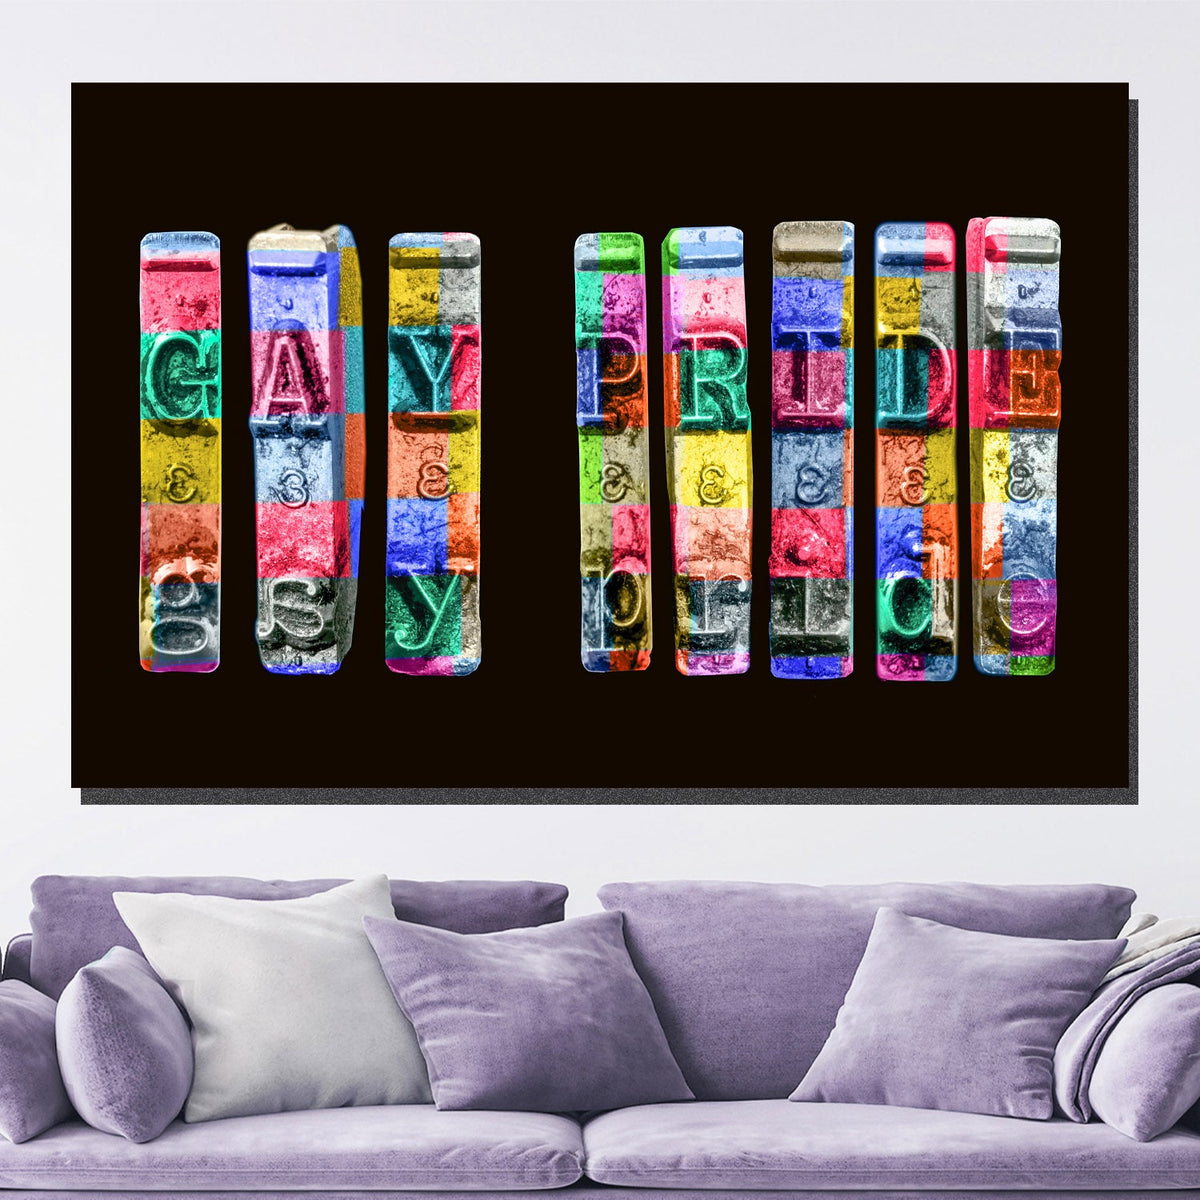 https://cdn.shopify.com/s/files/1/0387/9986/8044/products/GayPrideCanvasArtprintStretched-1.jpg